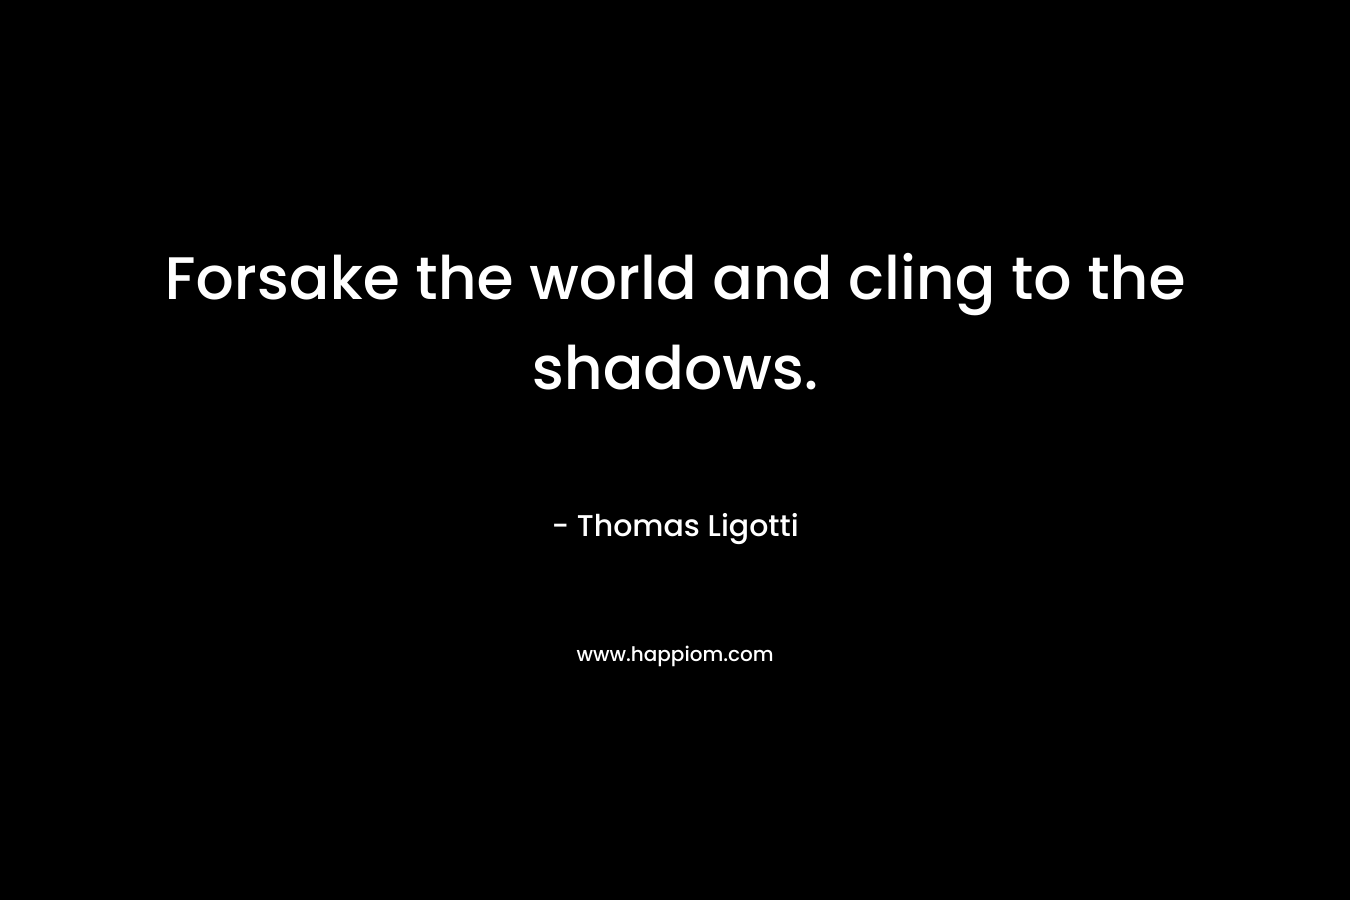 Forsake the world and cling to the shadows. – Thomas Ligotti